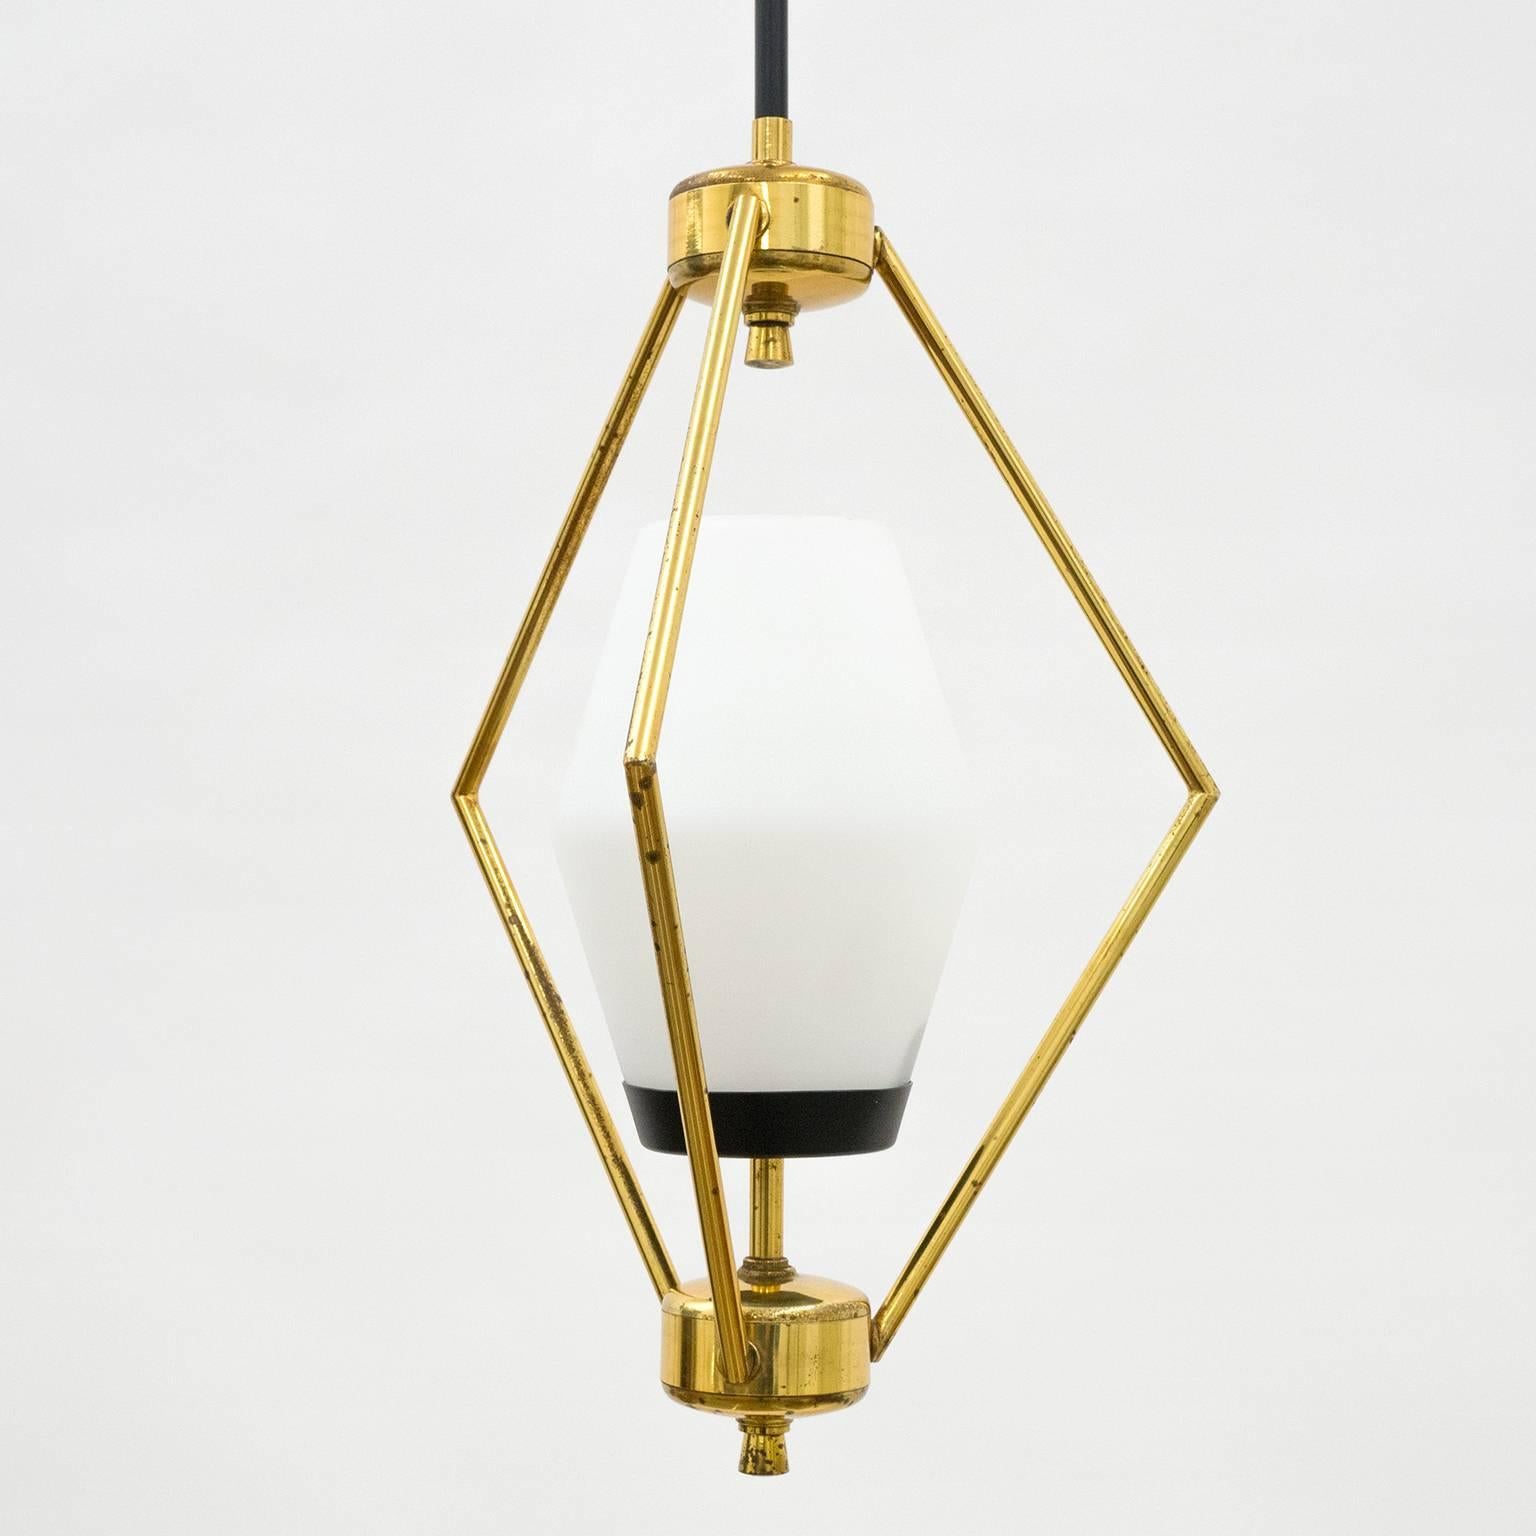 Mid-20th Century Sculptural Modernist Italian Brass and Glass Pendant, 1950s